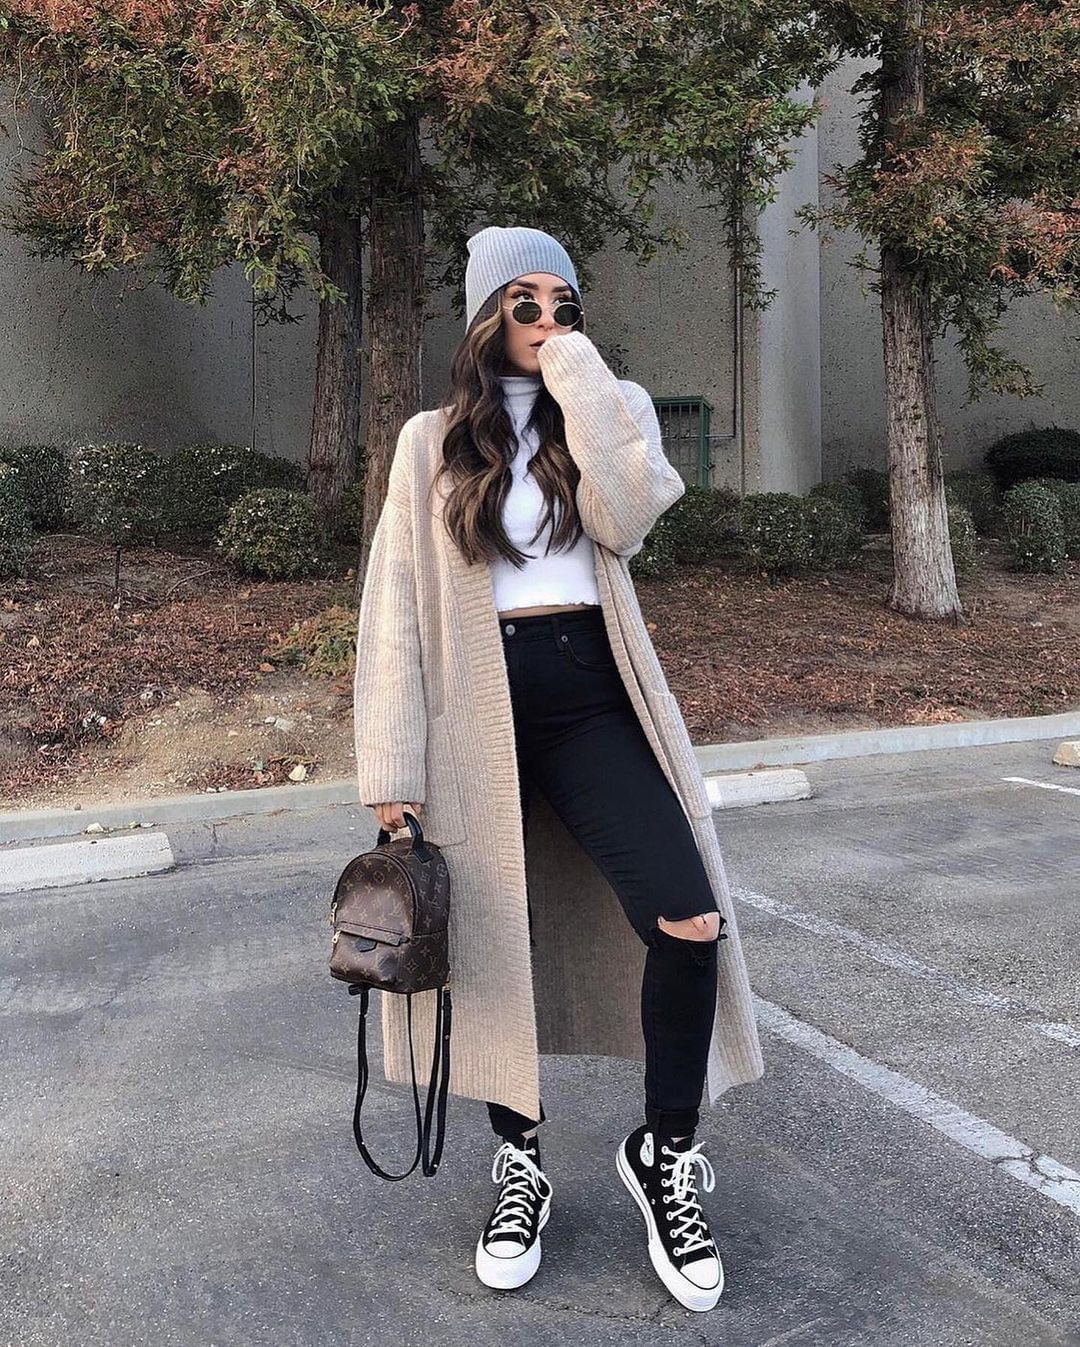 American Style on Instagram: 7 Autumn outfit ideas by @thanyaw  #americanstyle #ootd #style #fashion #onlineshopping #falllook #fallfashion  #falloutfit #outfit …